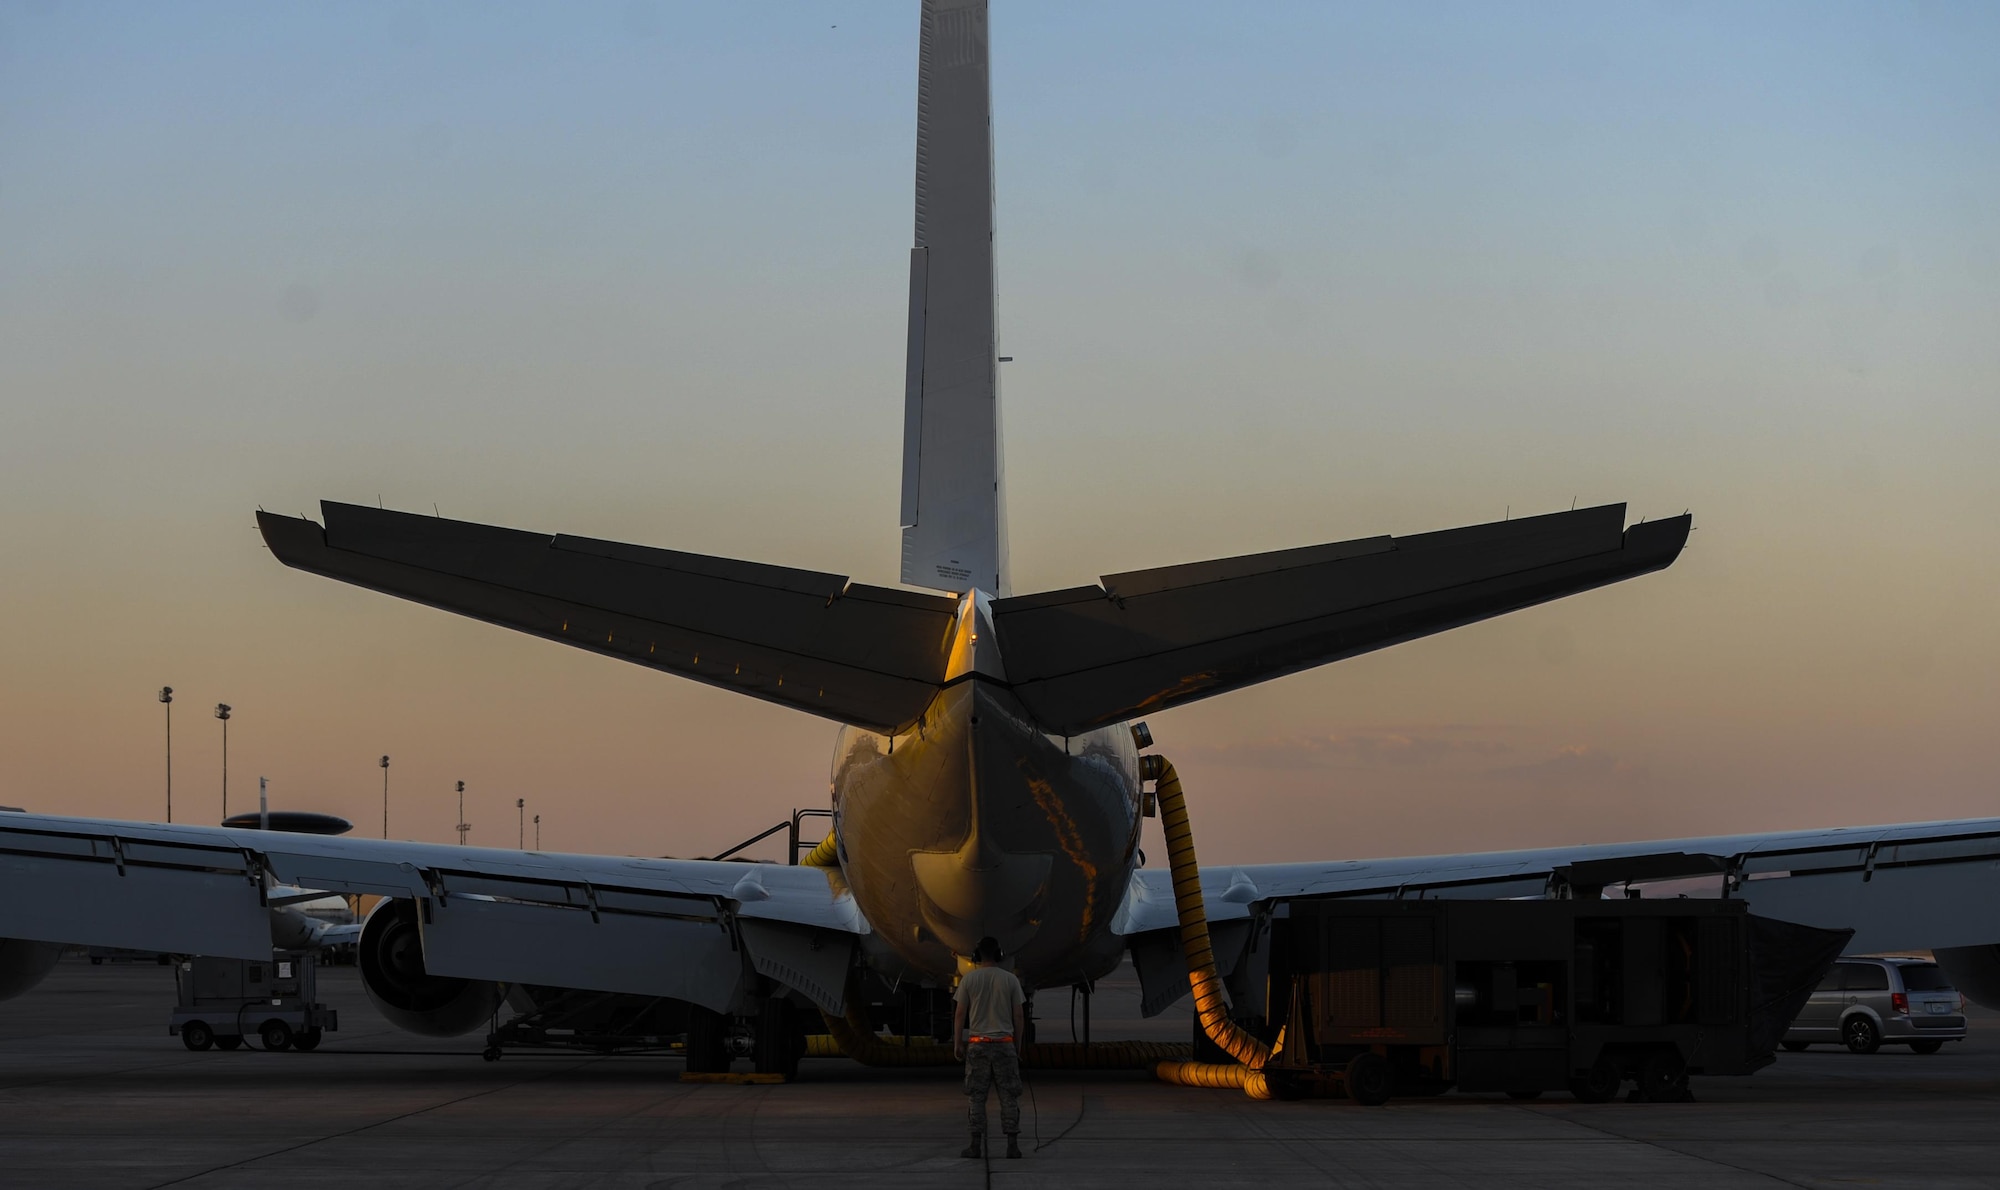 An RC-135, assigned to the 38th Reconnaissance Squadron Offutt Air Force Base, Neb., prepares for take-off during Red Flag 16-3 at Nellis Air Force Base, Nev., July 26, 2016. Red Flag provides an opportunity for aircrew and military aircraft to enhance their tactical operational skills alongside military aircraft from coalition forces. (U.S. Air Force photo by Airman 1st Class Kevin Tanenbaum/Released)